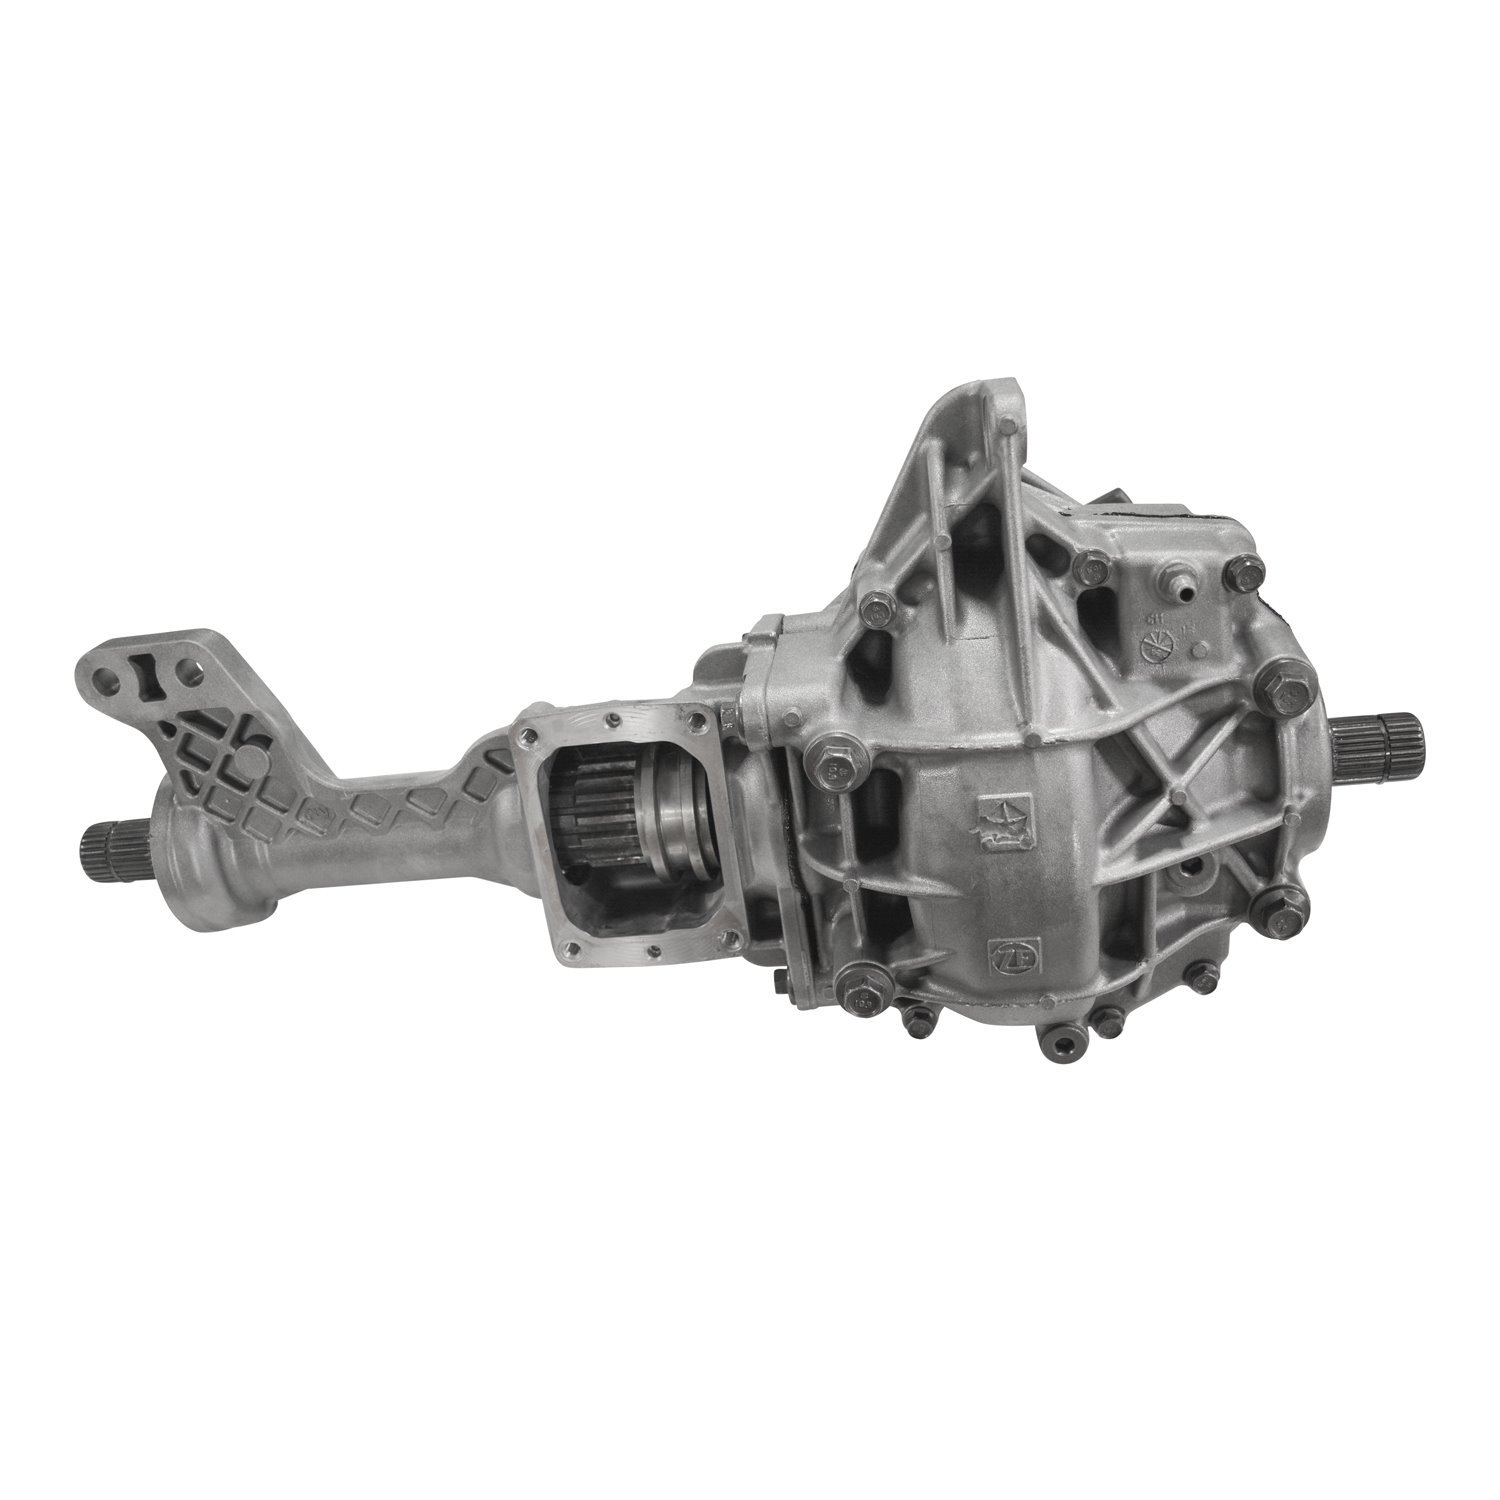 Remanufactured Front Axle Assy, C215F, 8.46" Ring Gear, 2013-18 Ram 1500 3.92 Ratio